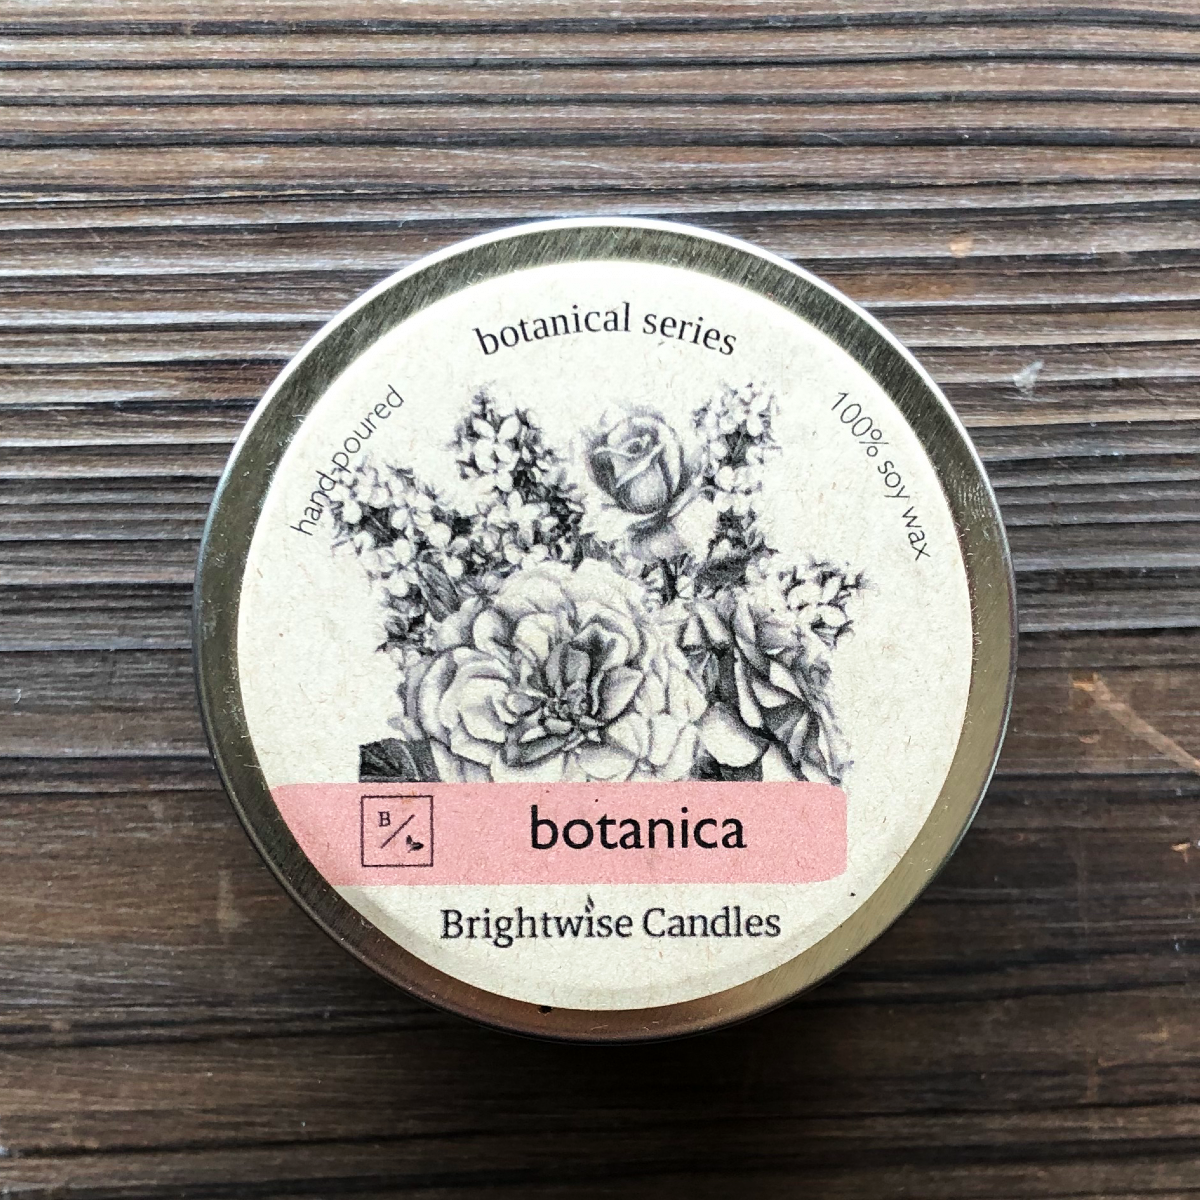 Botanica Scented Soy Wax Candle Tin - Brightwise Candles